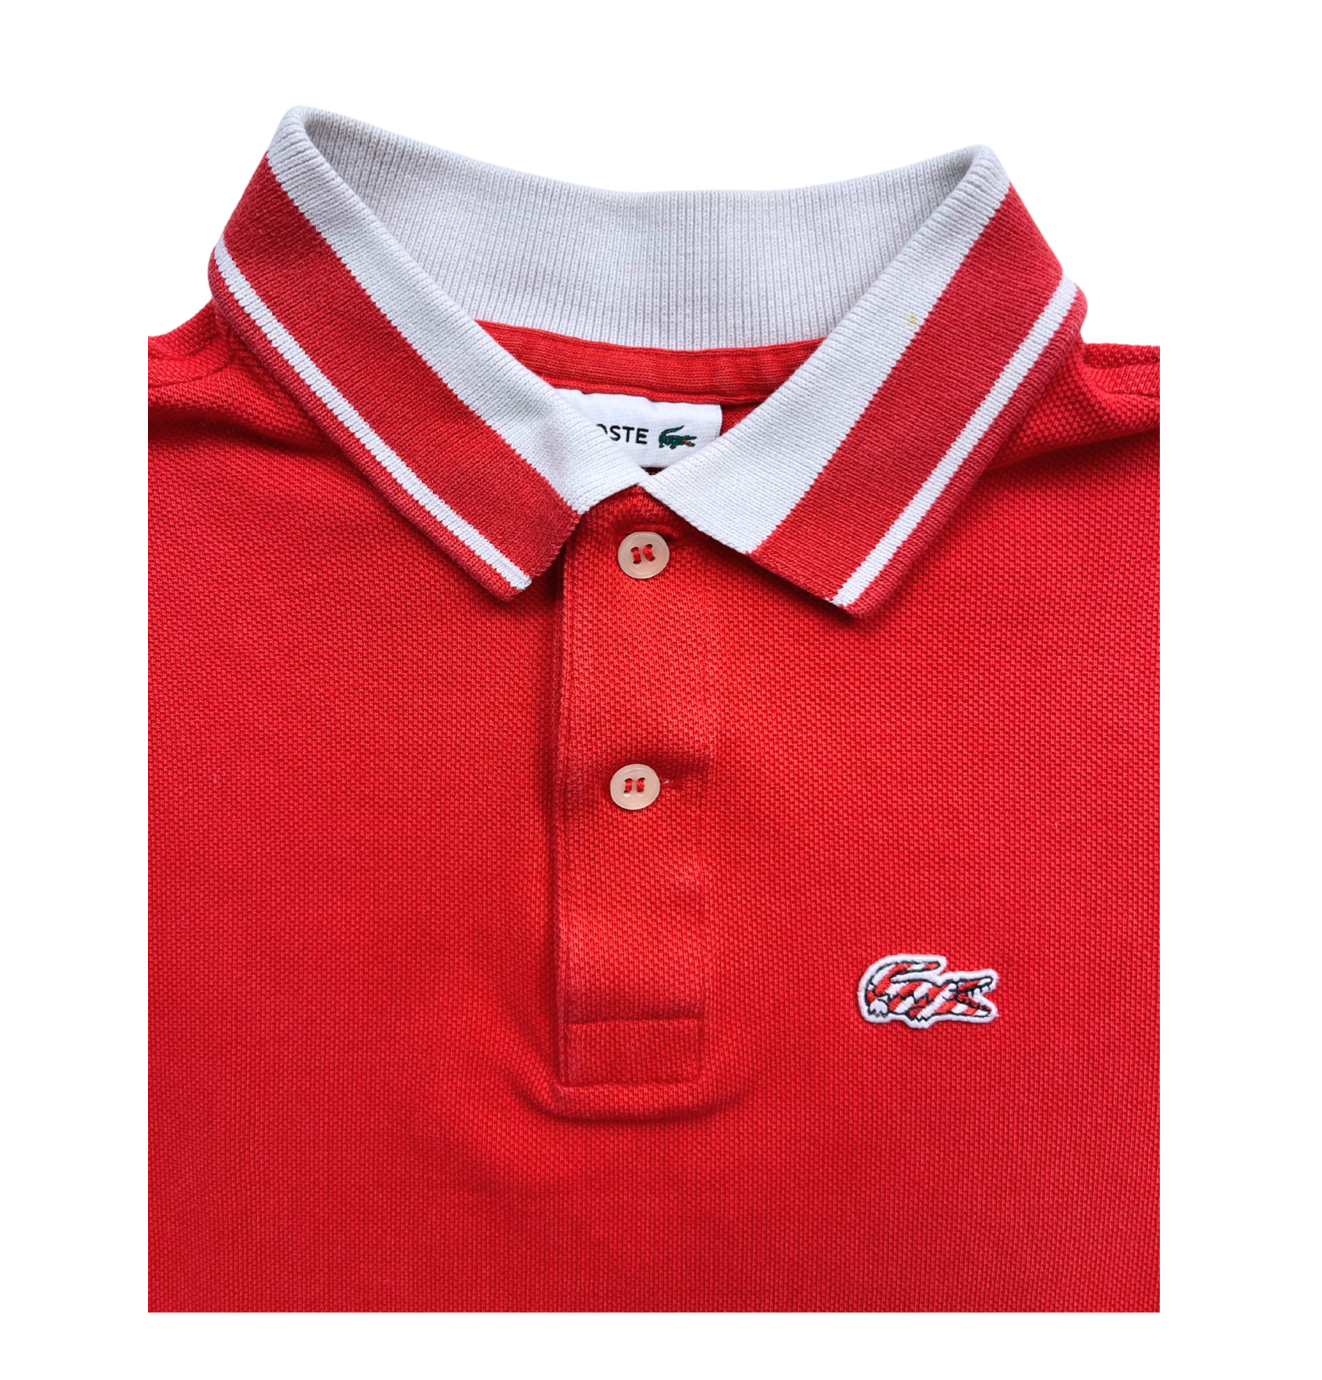 LACOSTE - Polo rouge col rayé - 10 ans